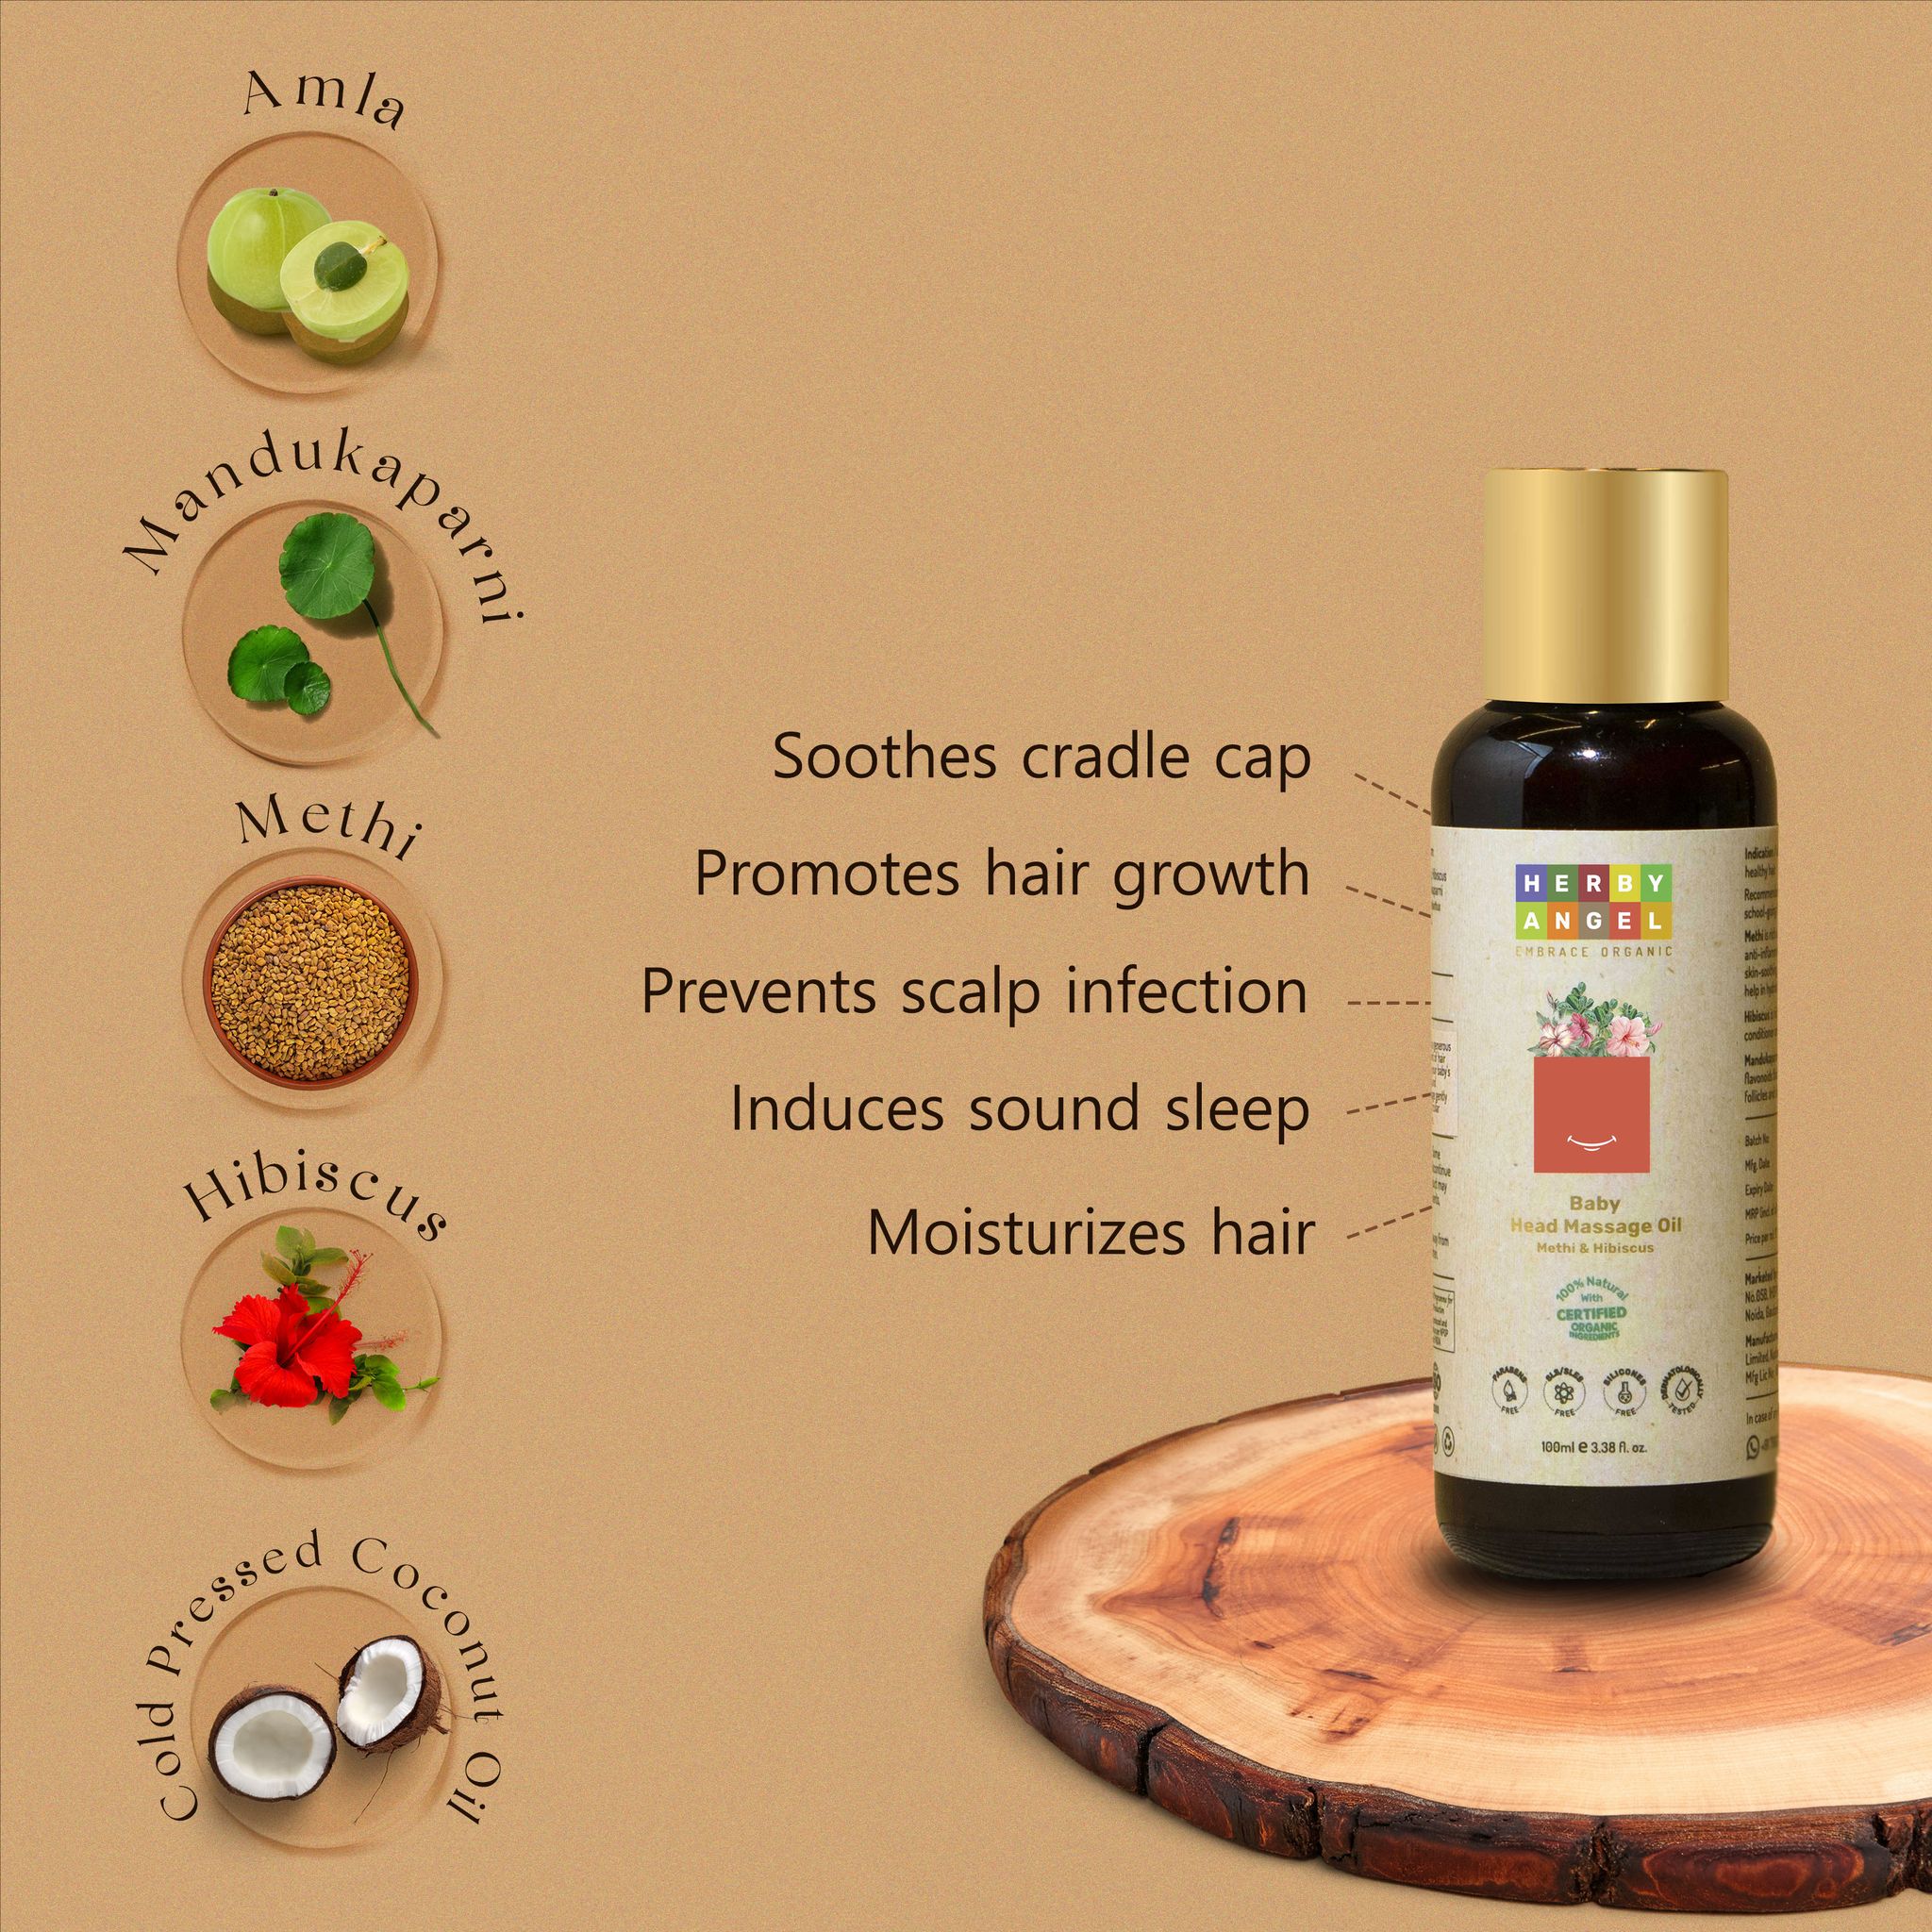 Herby Angel Baby Head Massage Oil with Methi & Hibiscus